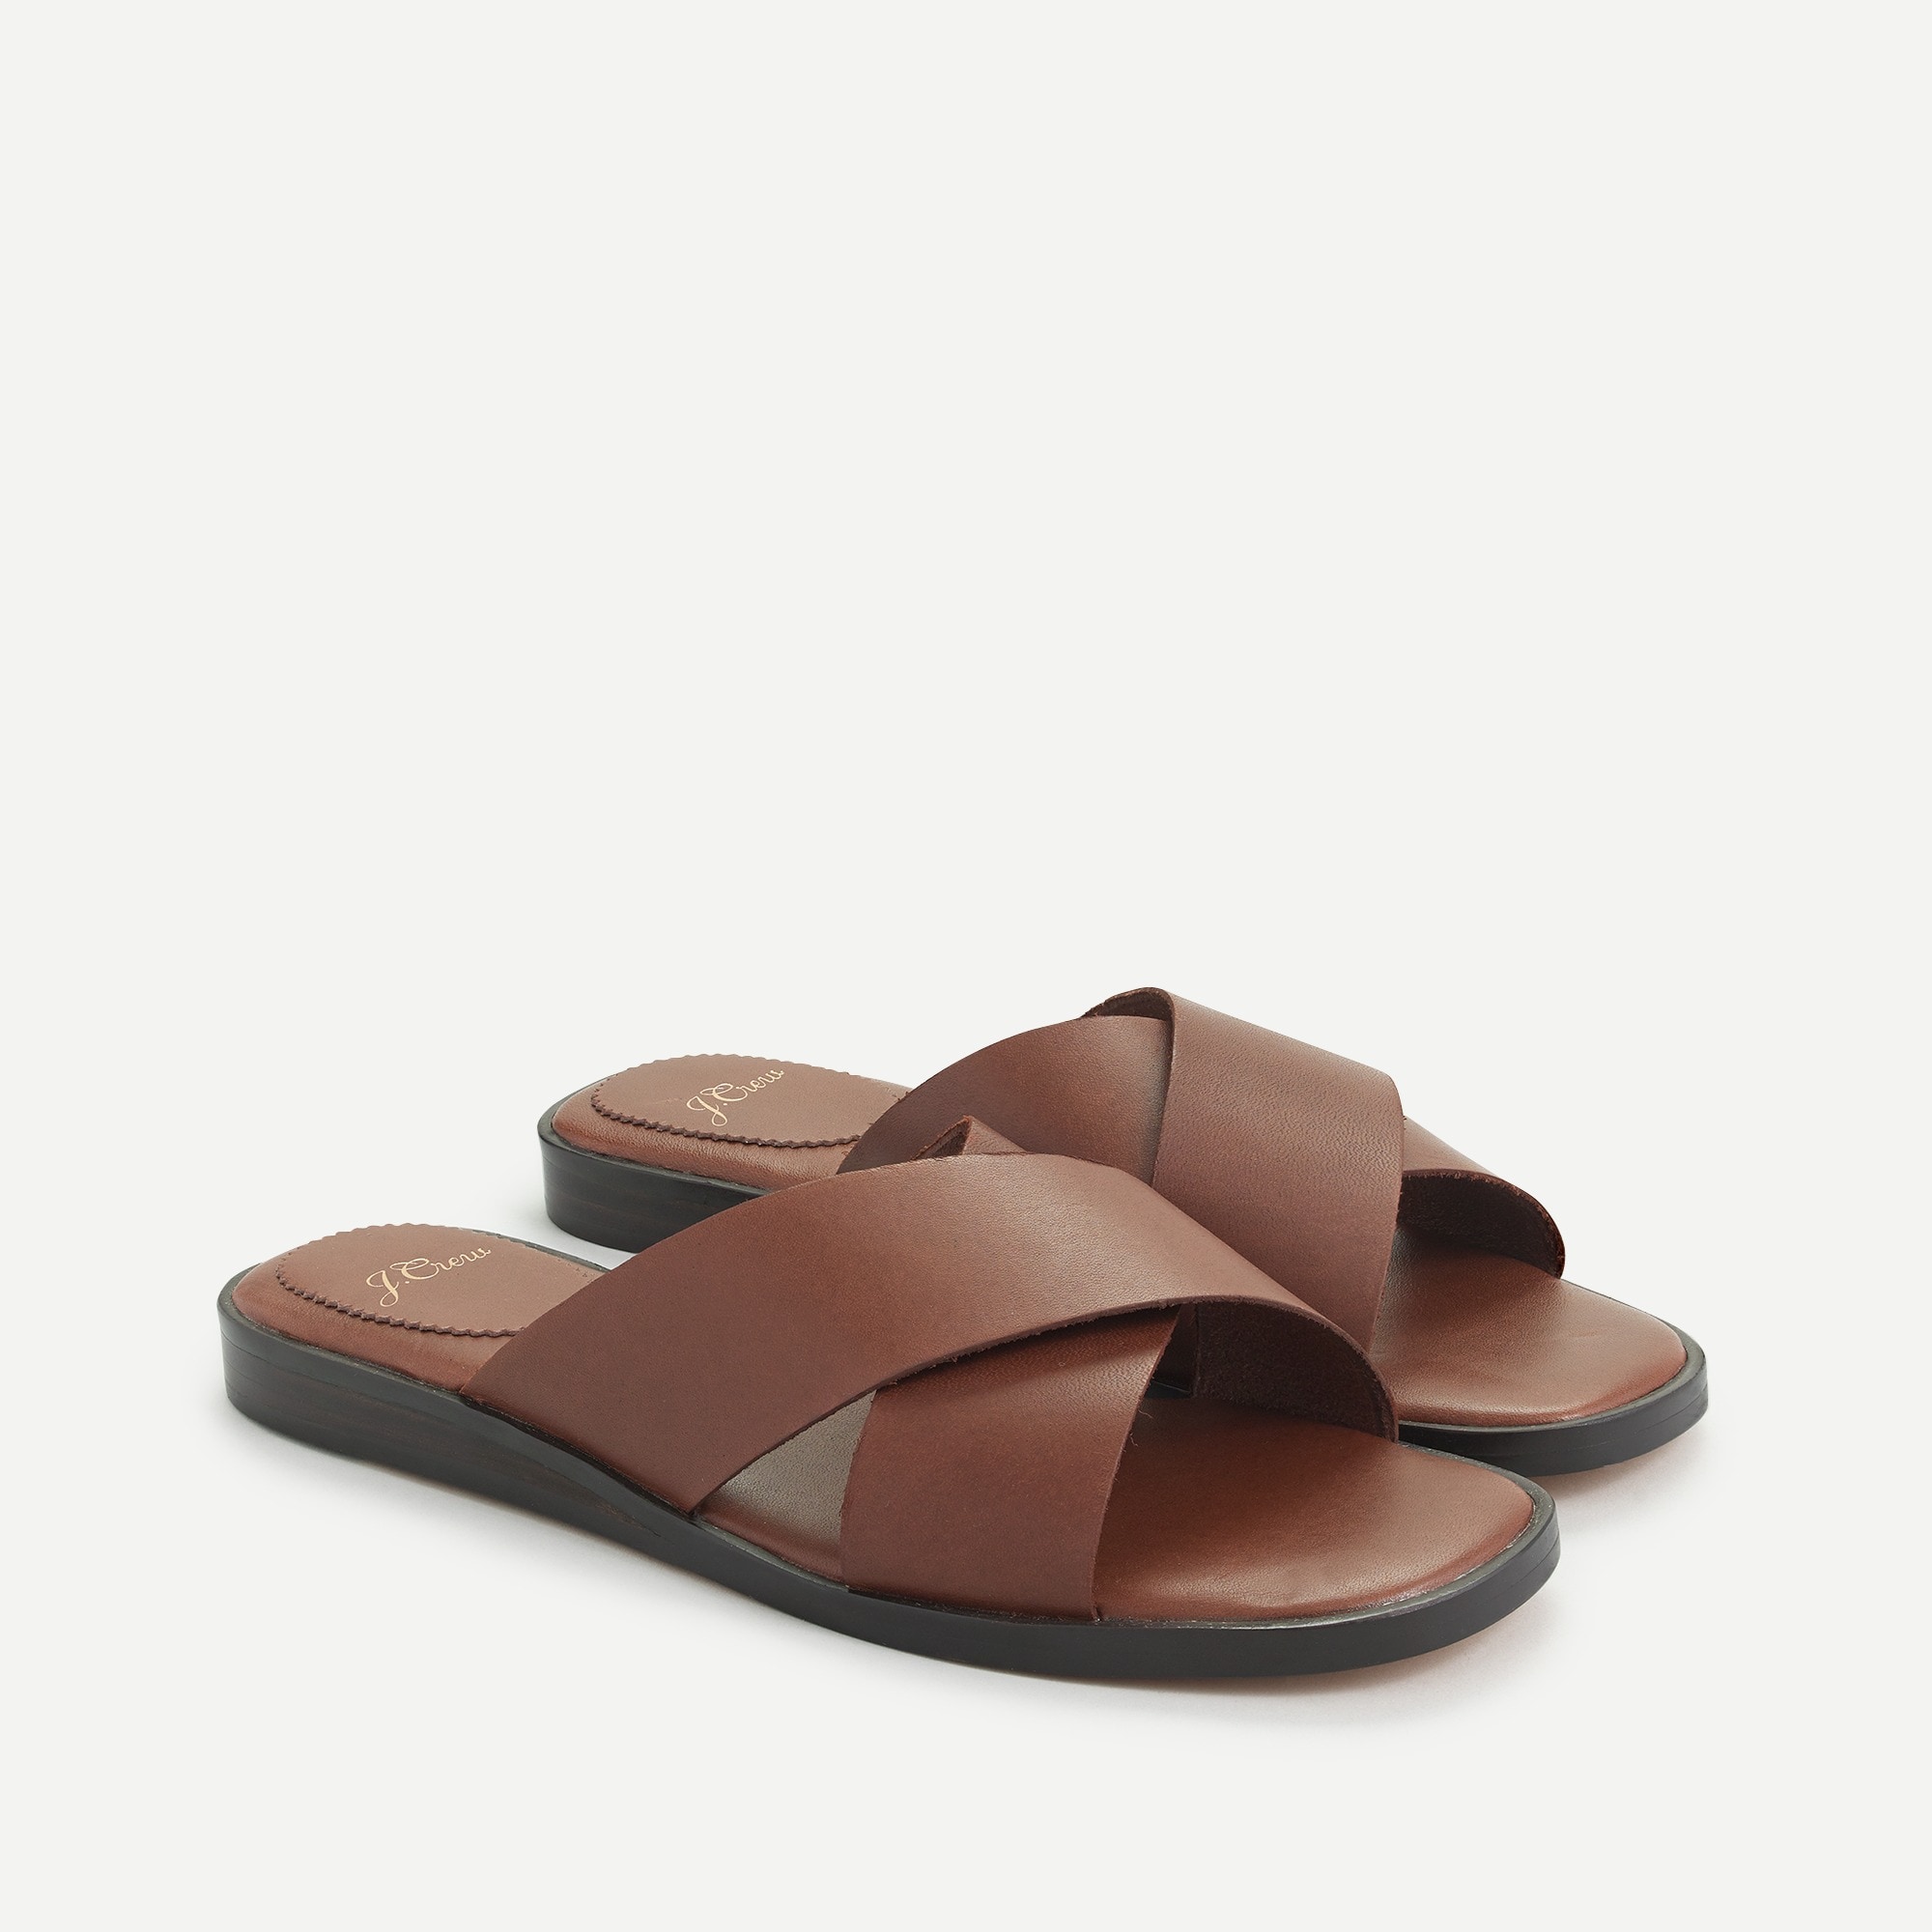 J.Crew: Gretchen Cross-strap Sandals In Leather For Women